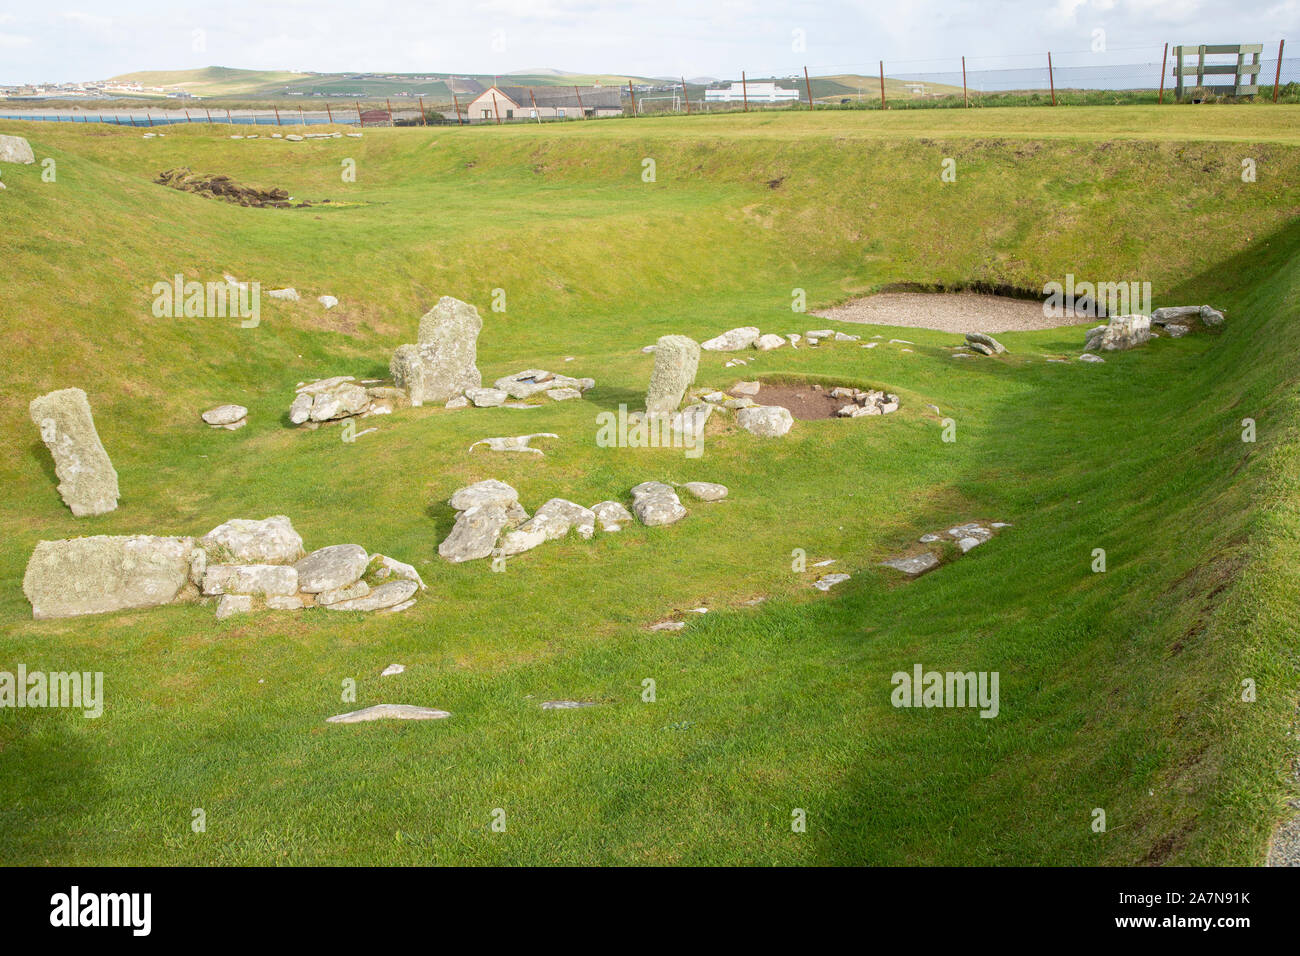 The outline of a Neolithic or Stone Age building at the Jarlshof settlement on the Mainland island of the Shetland Isles, Scotland Stock Photo